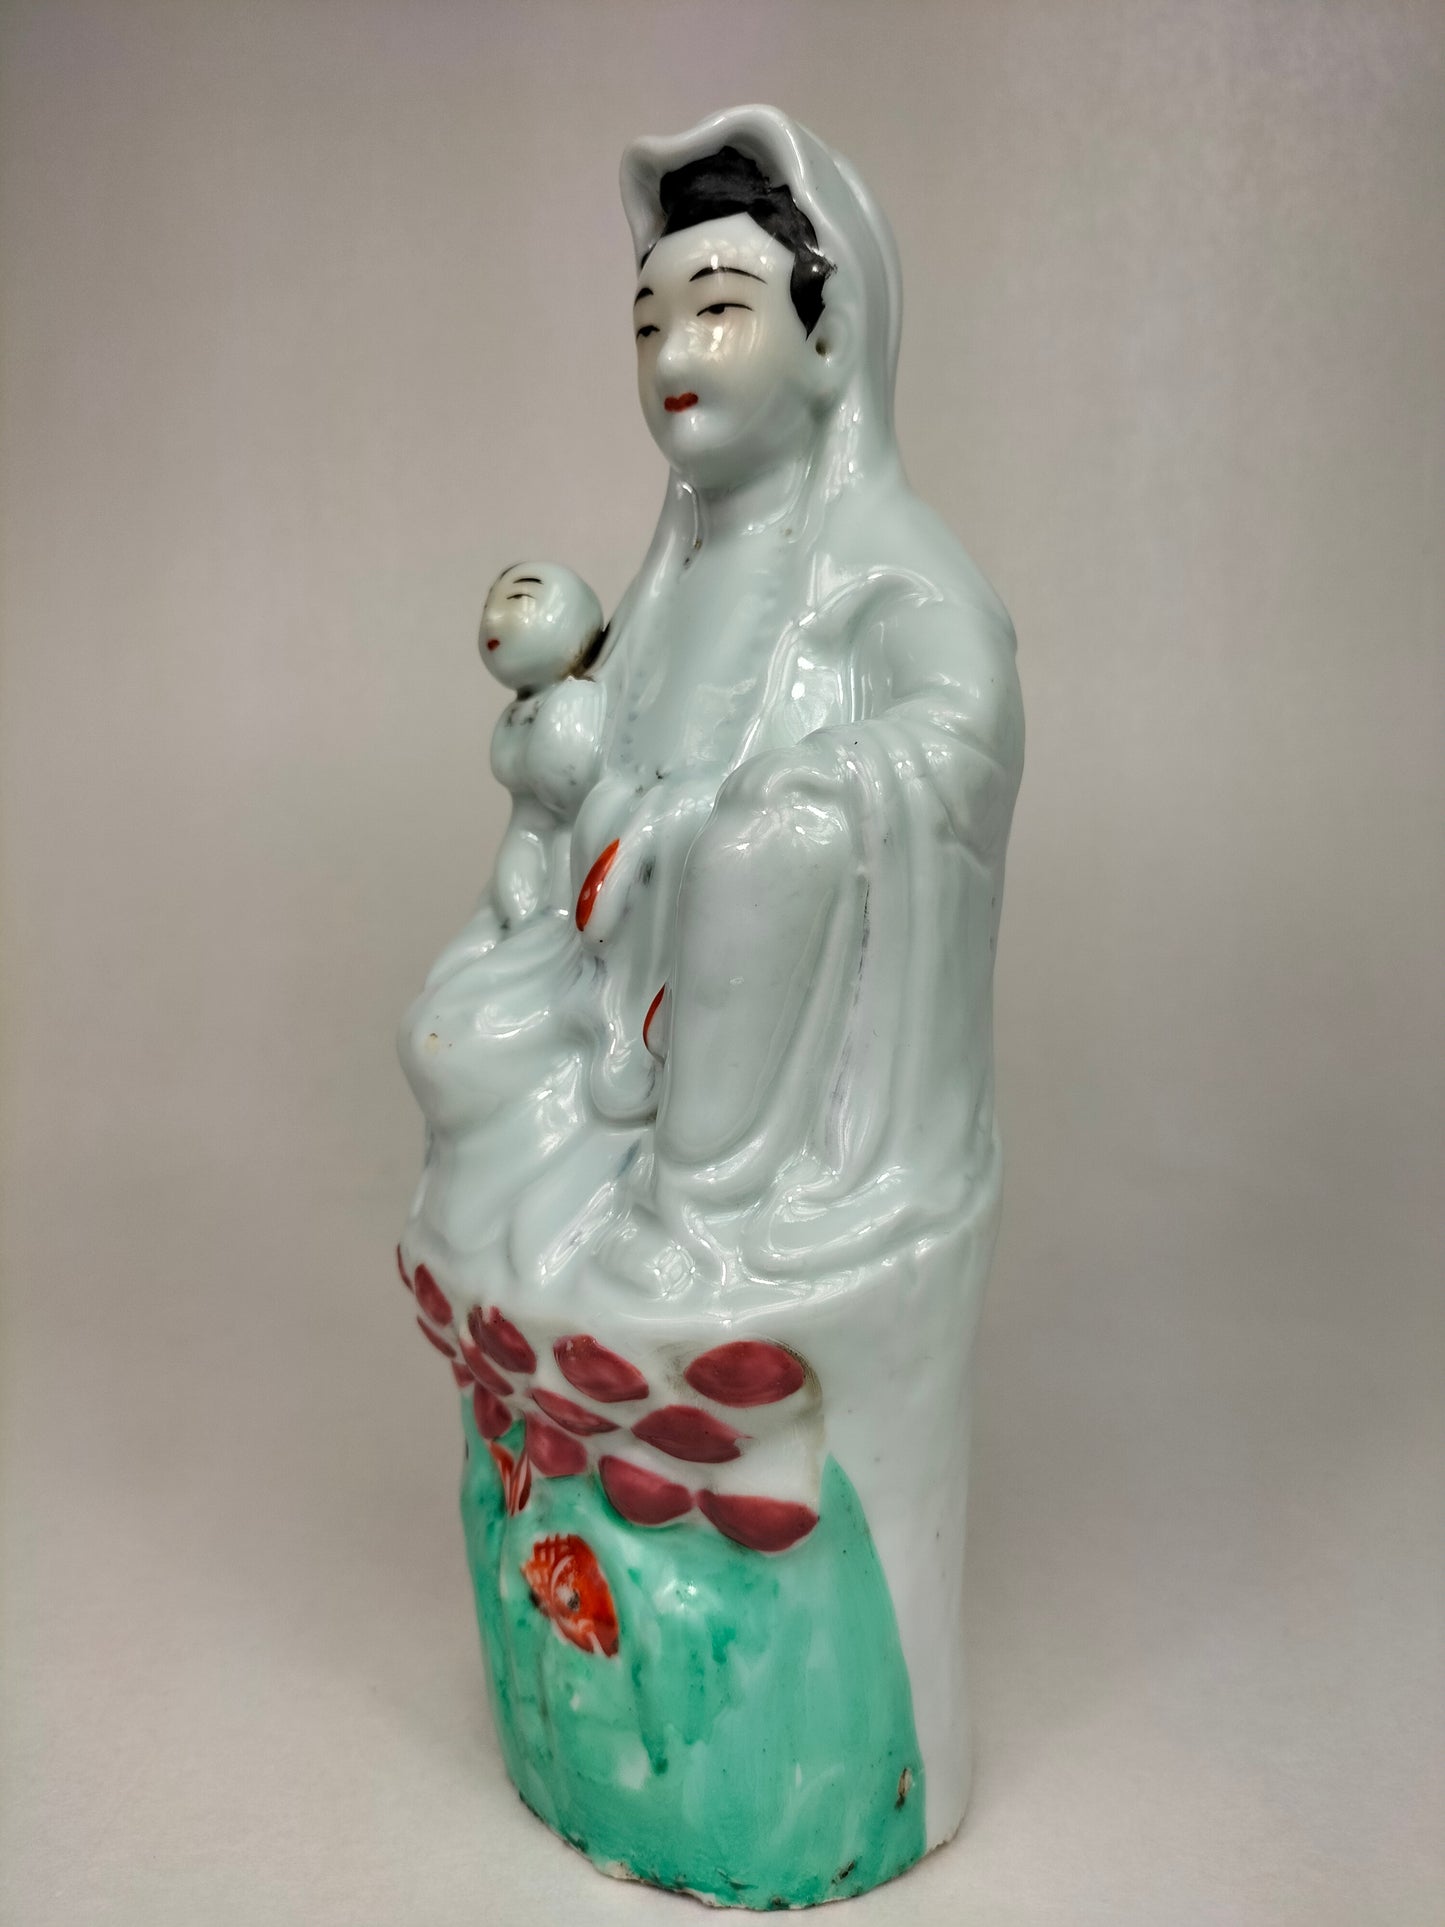 Antique Chinese porcelain statue of Quanyin with a child // Republic Period (1912-1949)